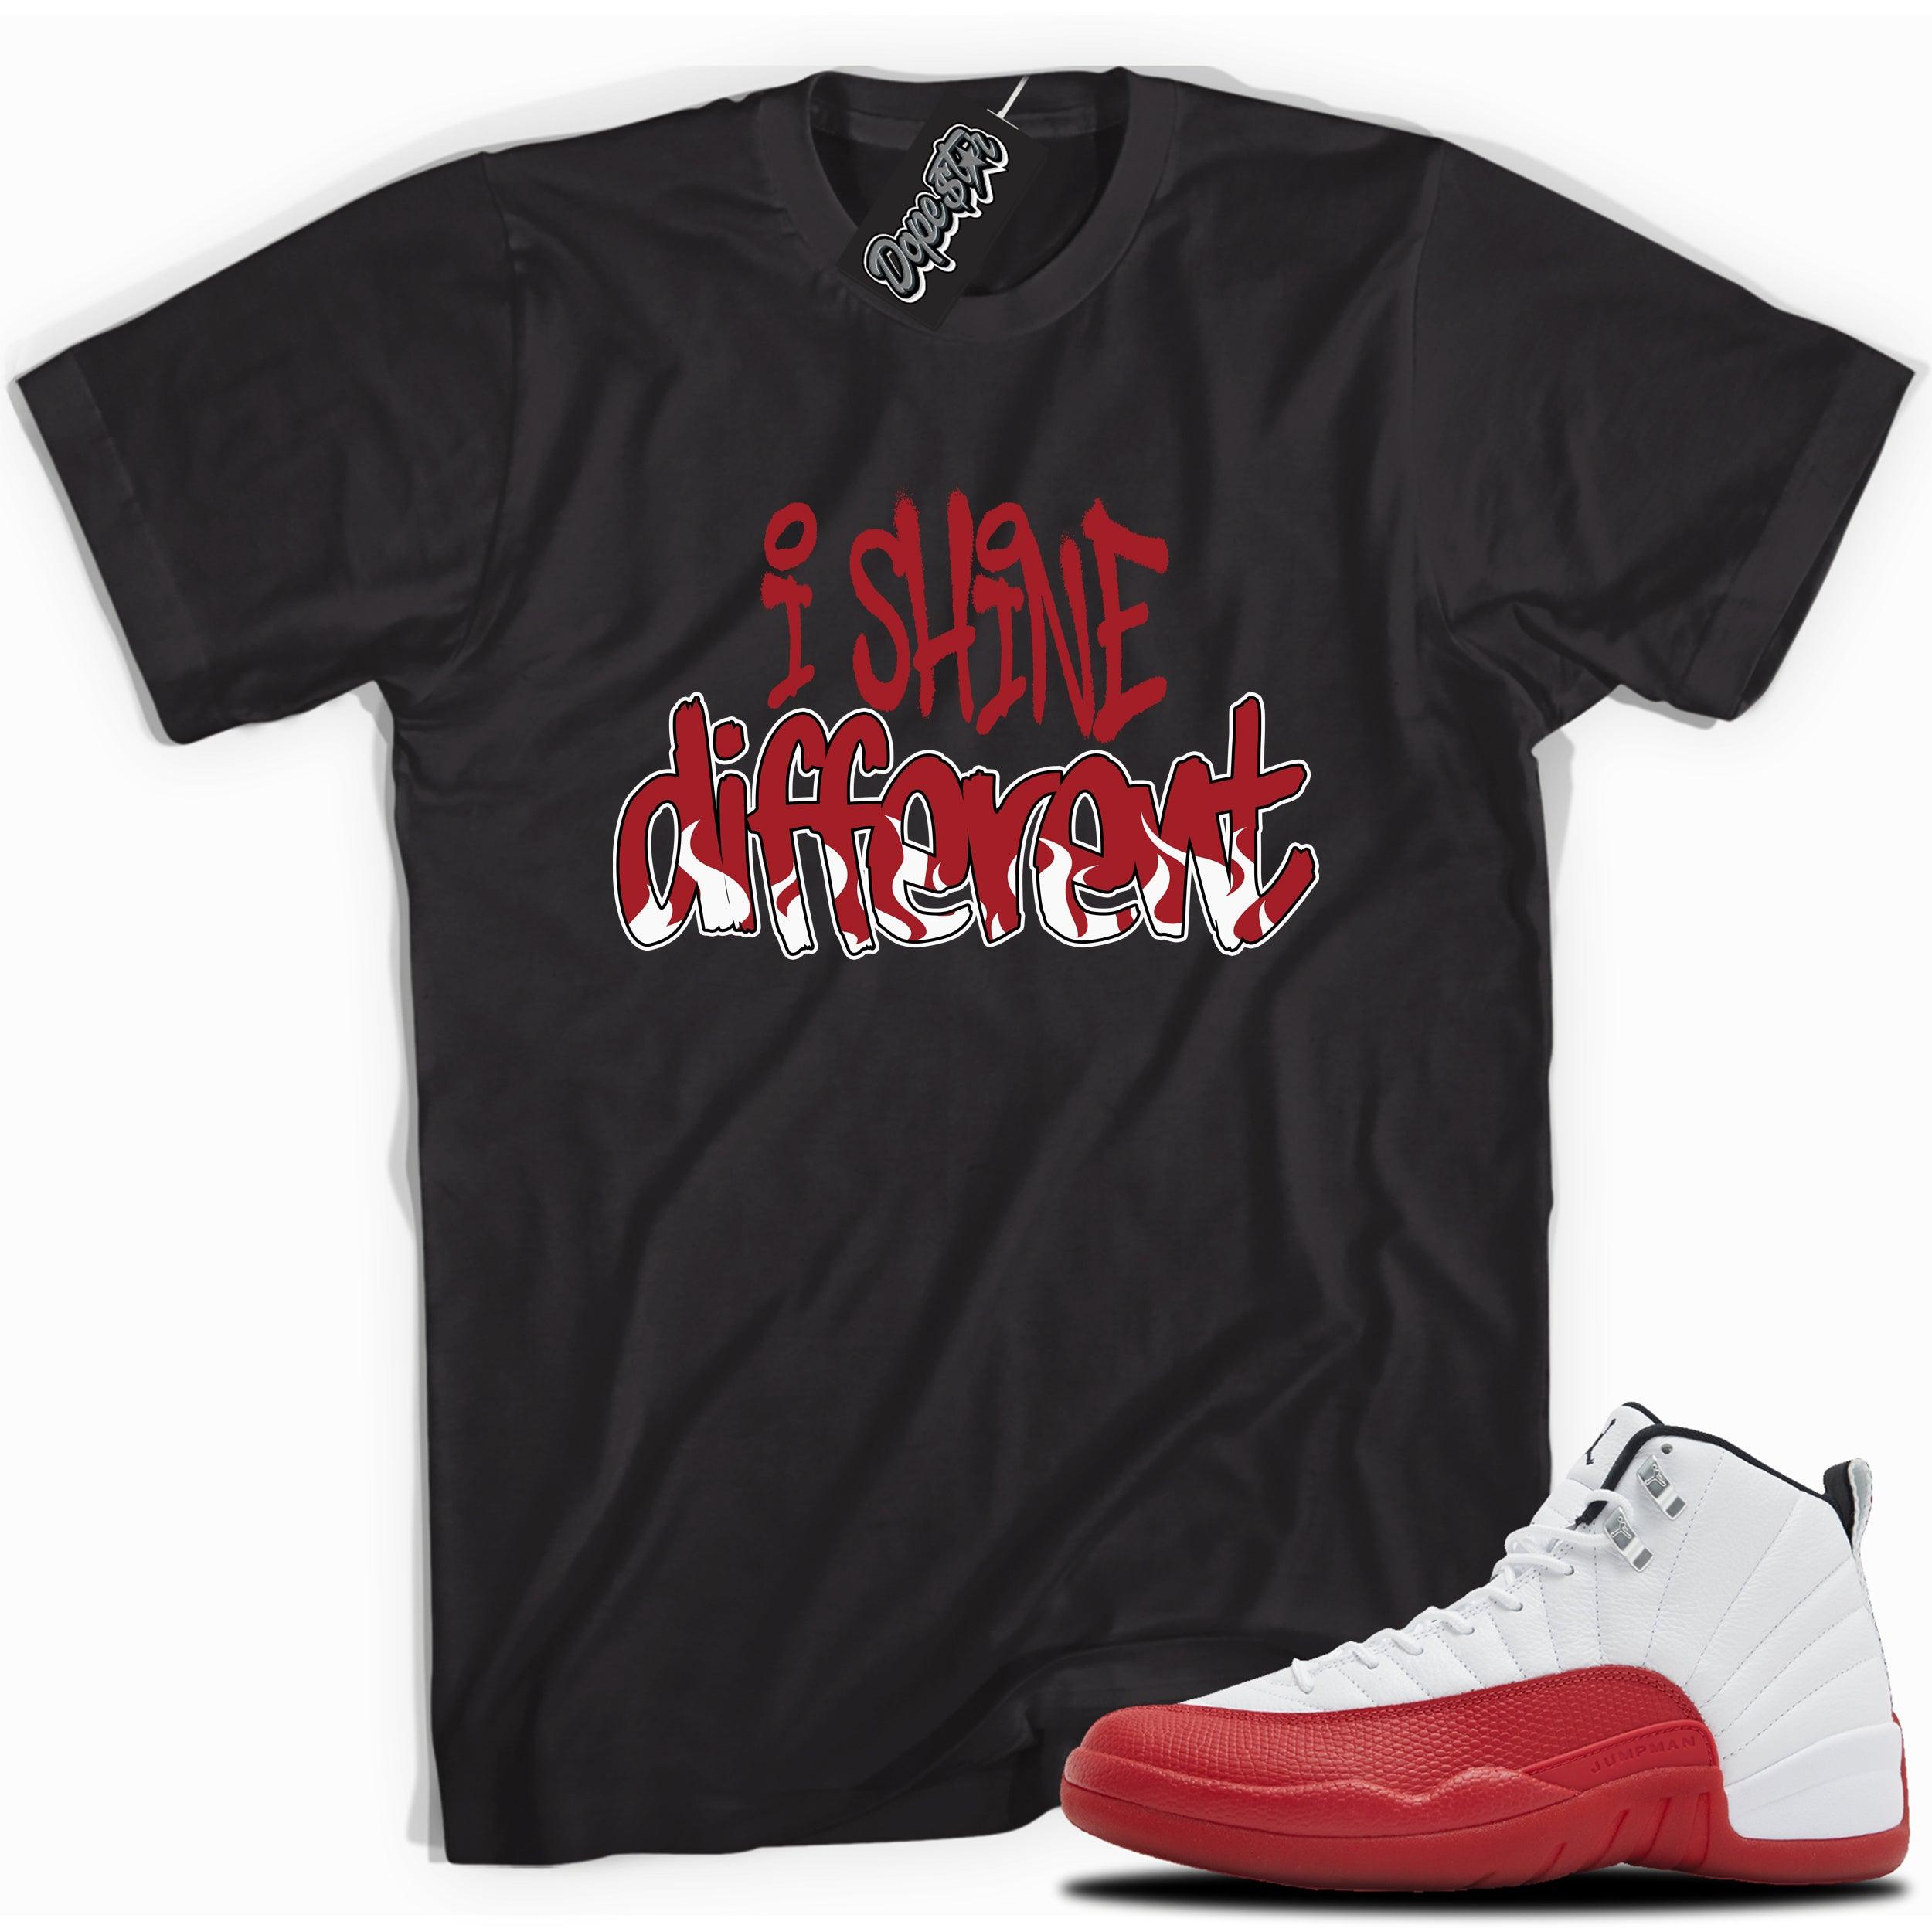 Cool Black graphic tee with “  I SHINE DIFFERENT  ” print, that perfectly matches Air Jordan 12 Retro Cherry Red 2023 red and white sneakers 